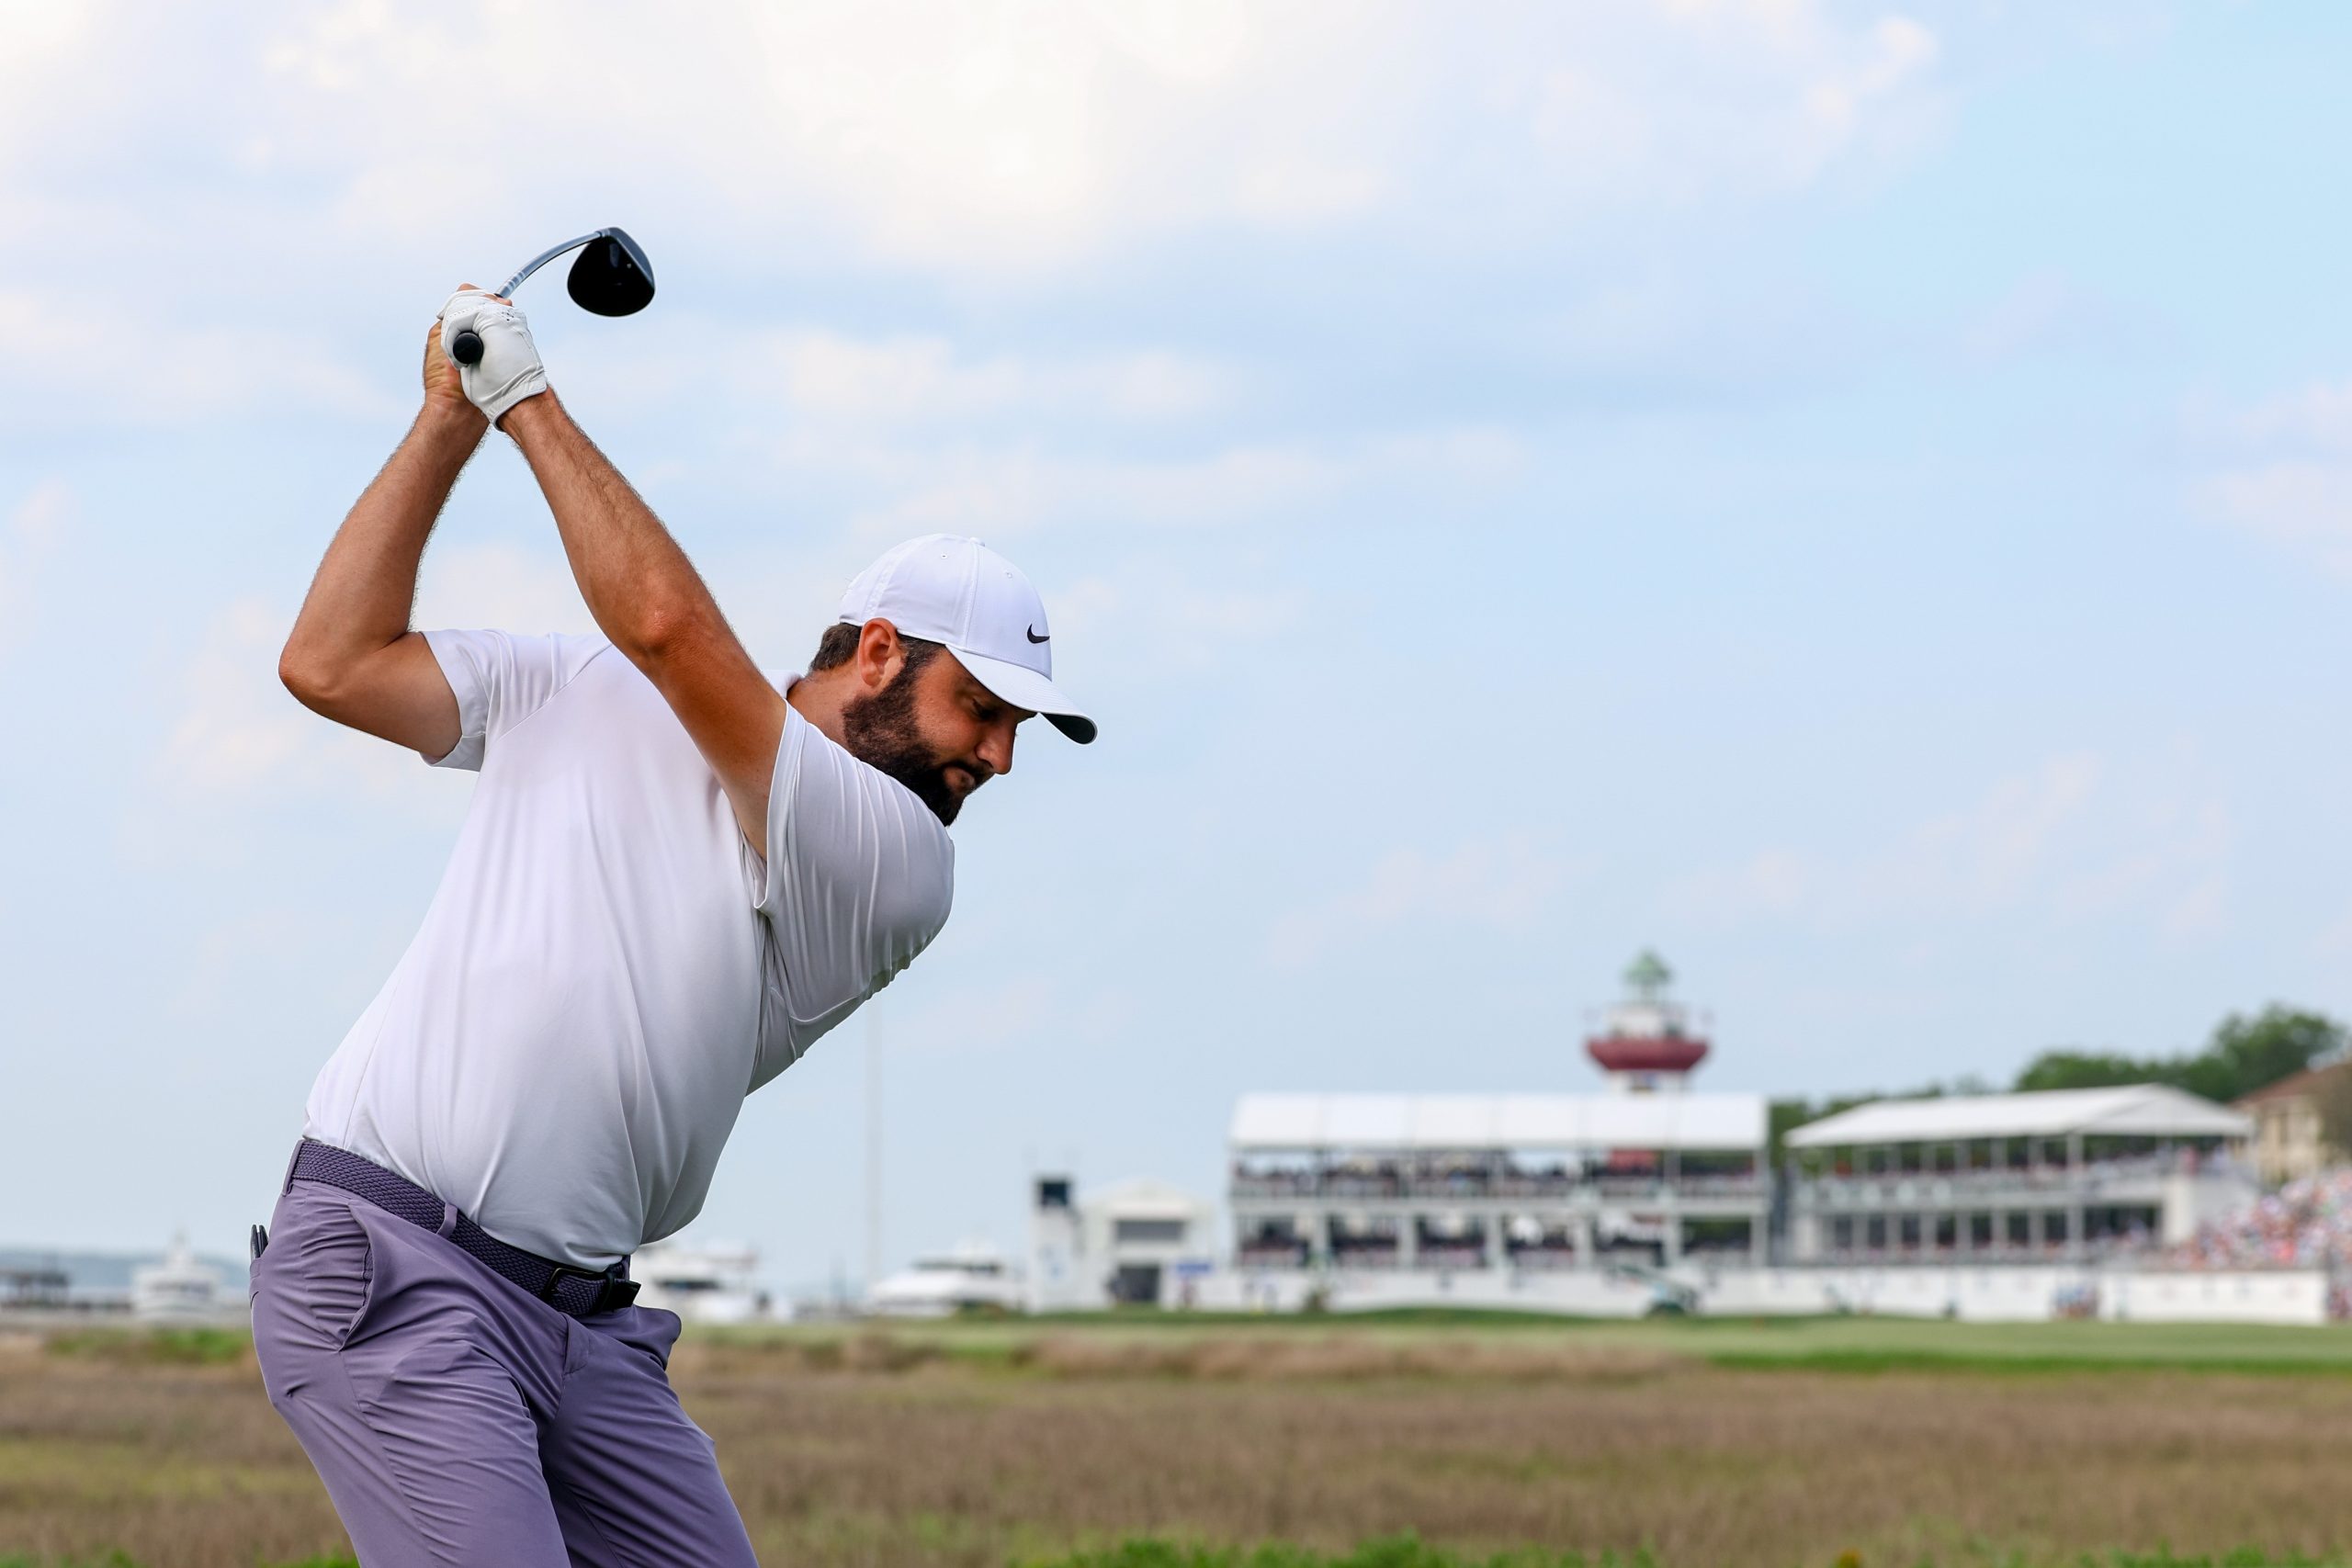 Scheffler Chases Another Win as Poston Leads RBC Heritage: A Look at the Top Contenders